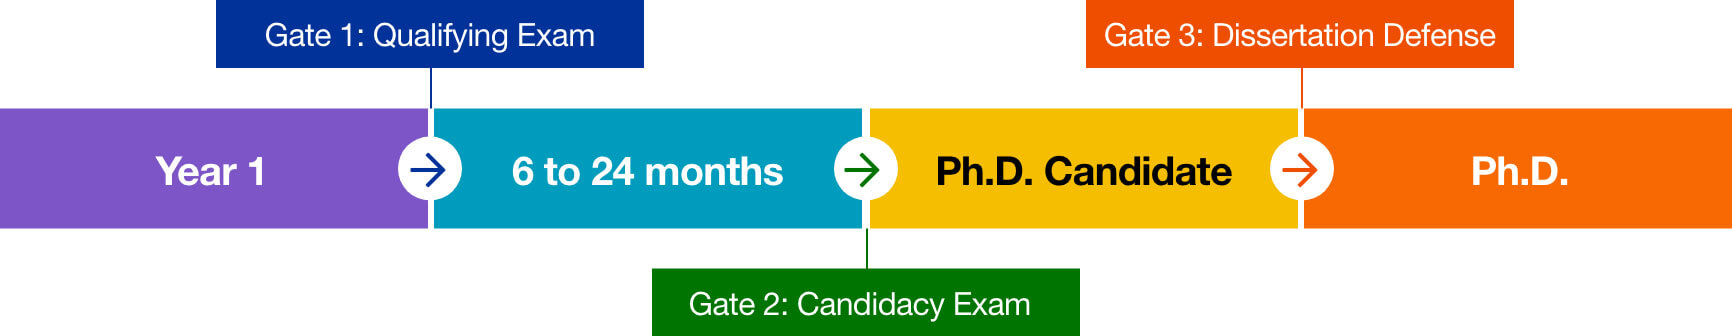 Info graphic showing the process for earning a Ph.D., as described in the curriculum table above.